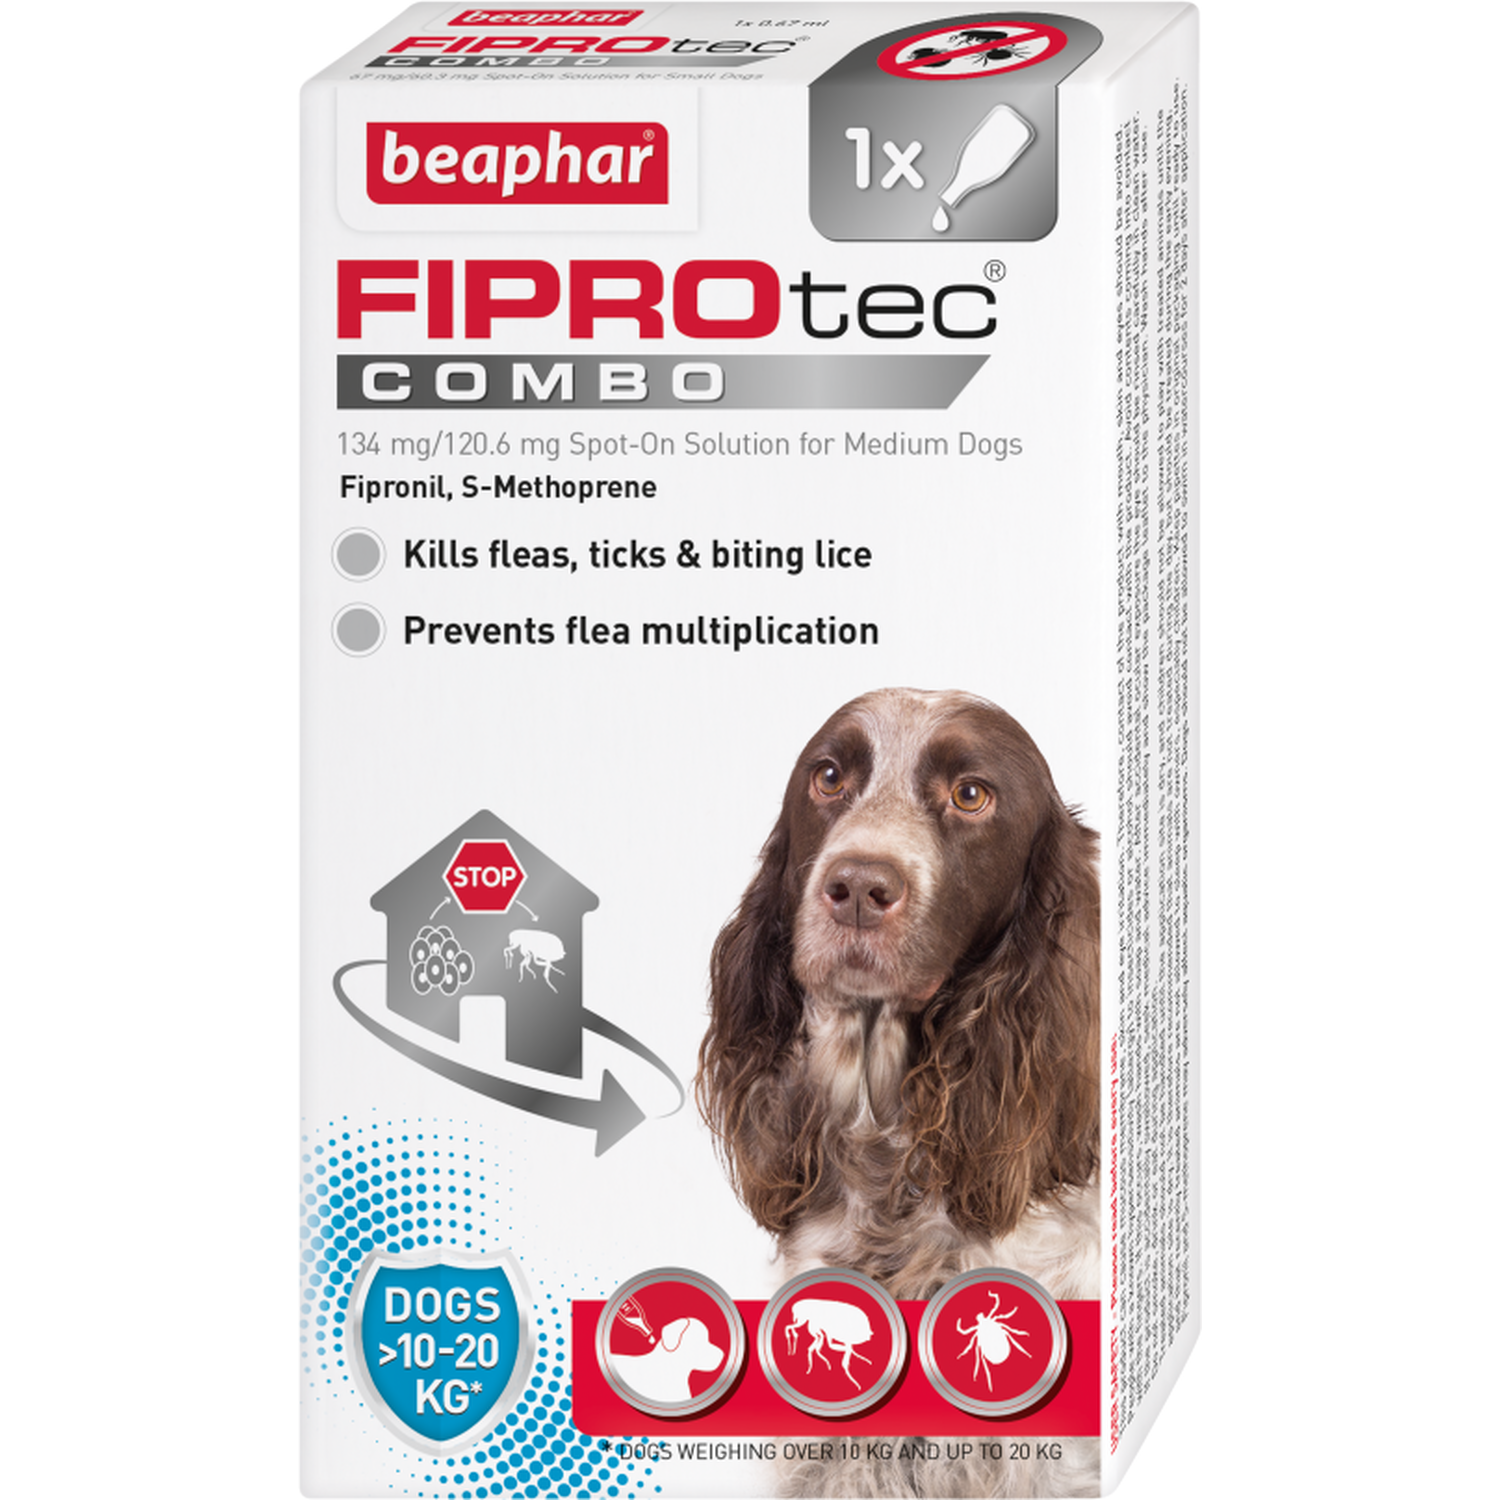 FIPROtec Combo Spot On for Dogs - Medium Breed Image